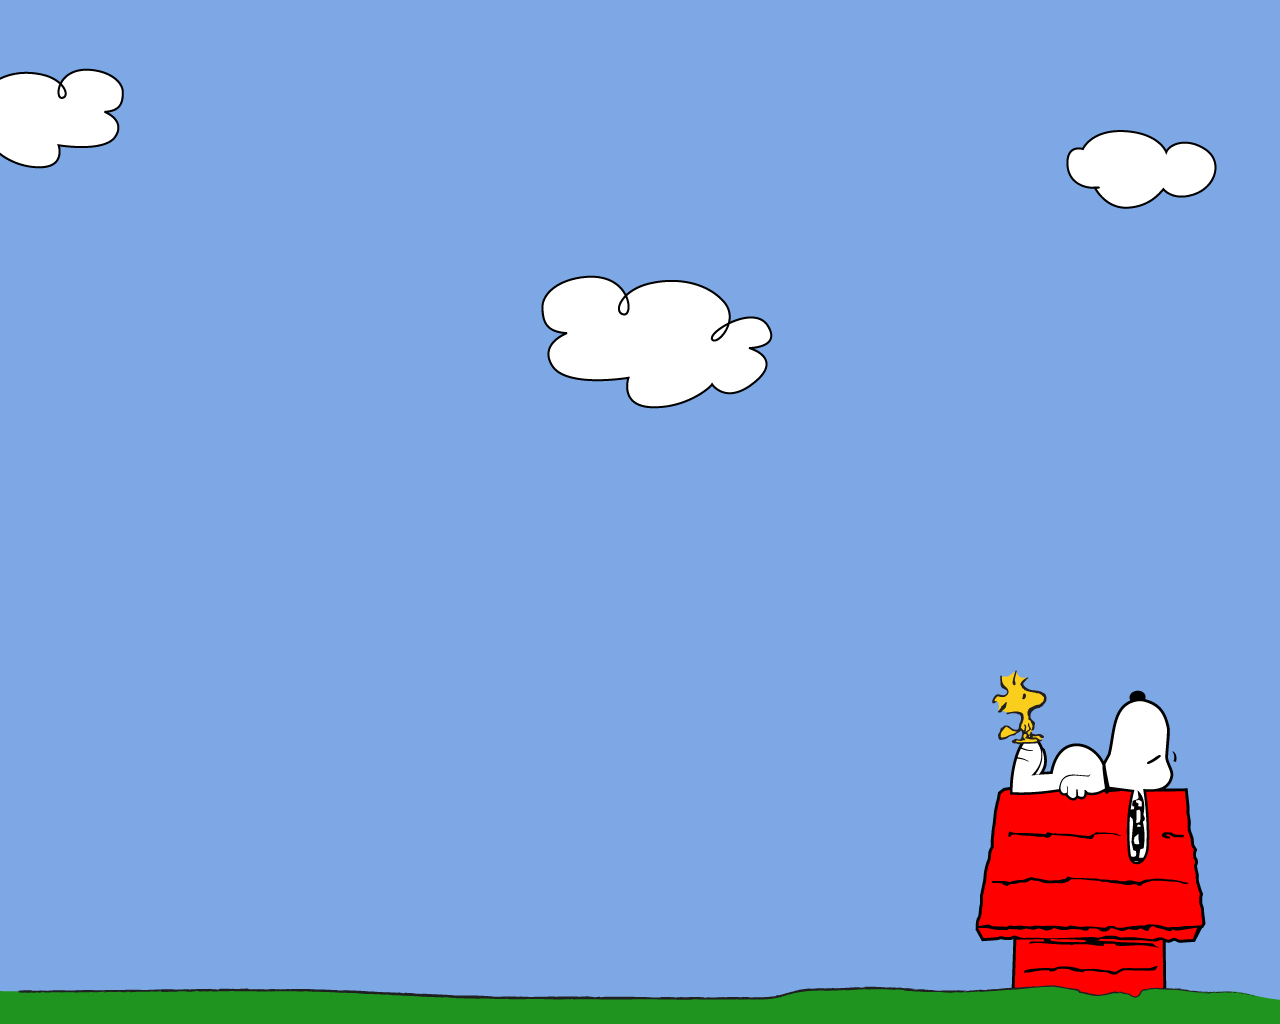 Snoopy Wallpapers HD clouds